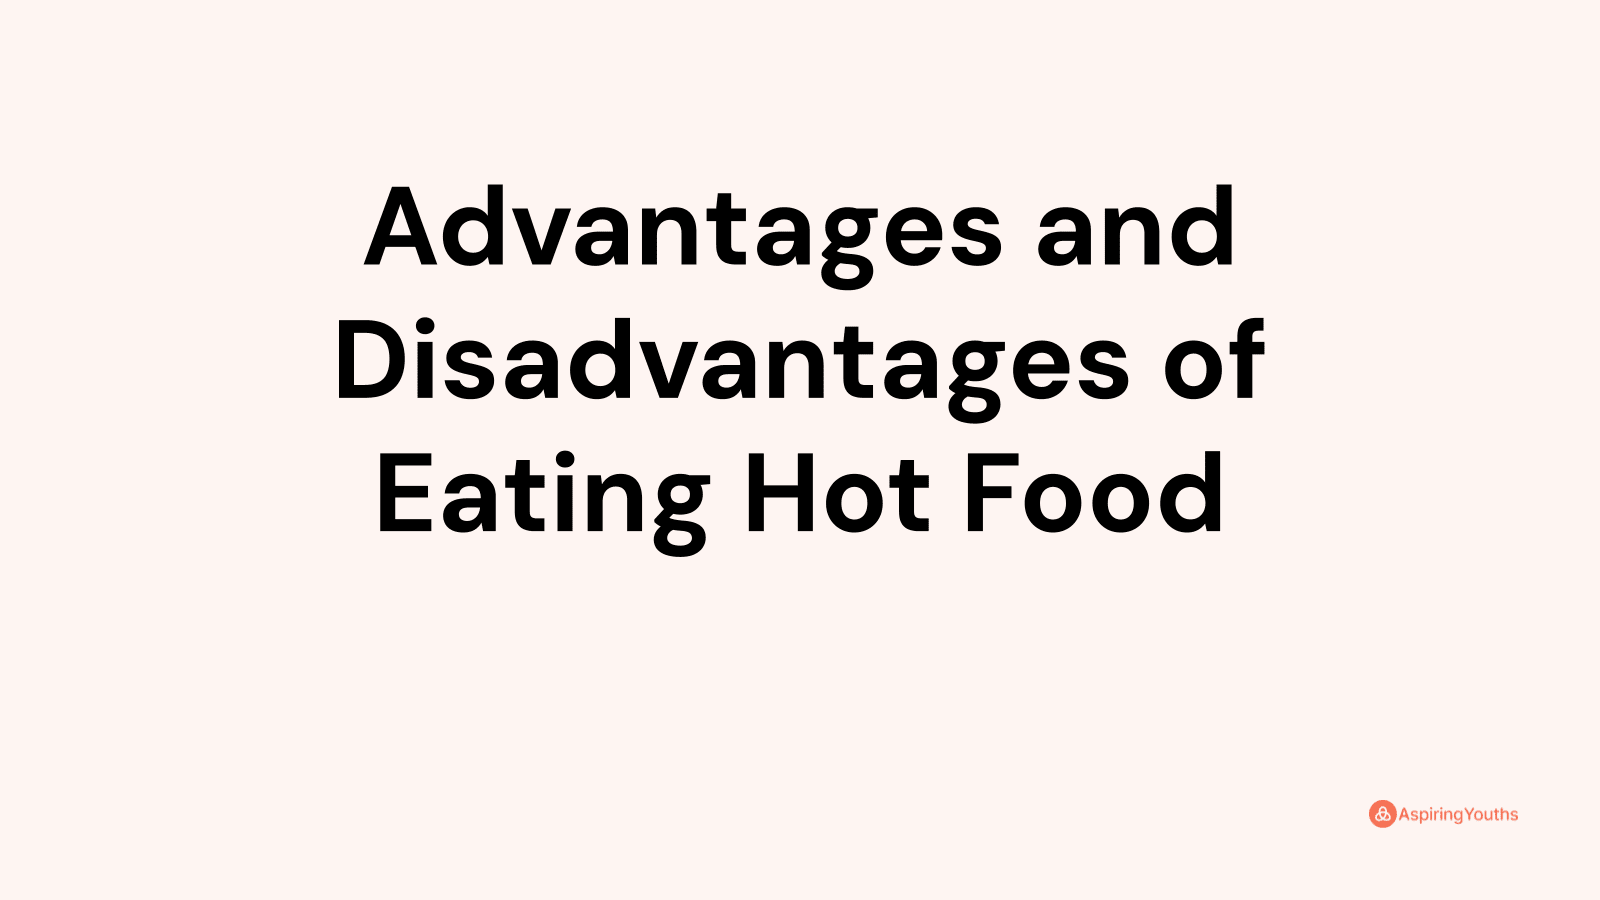 Advantages and disadvantages of Eating Hot Food